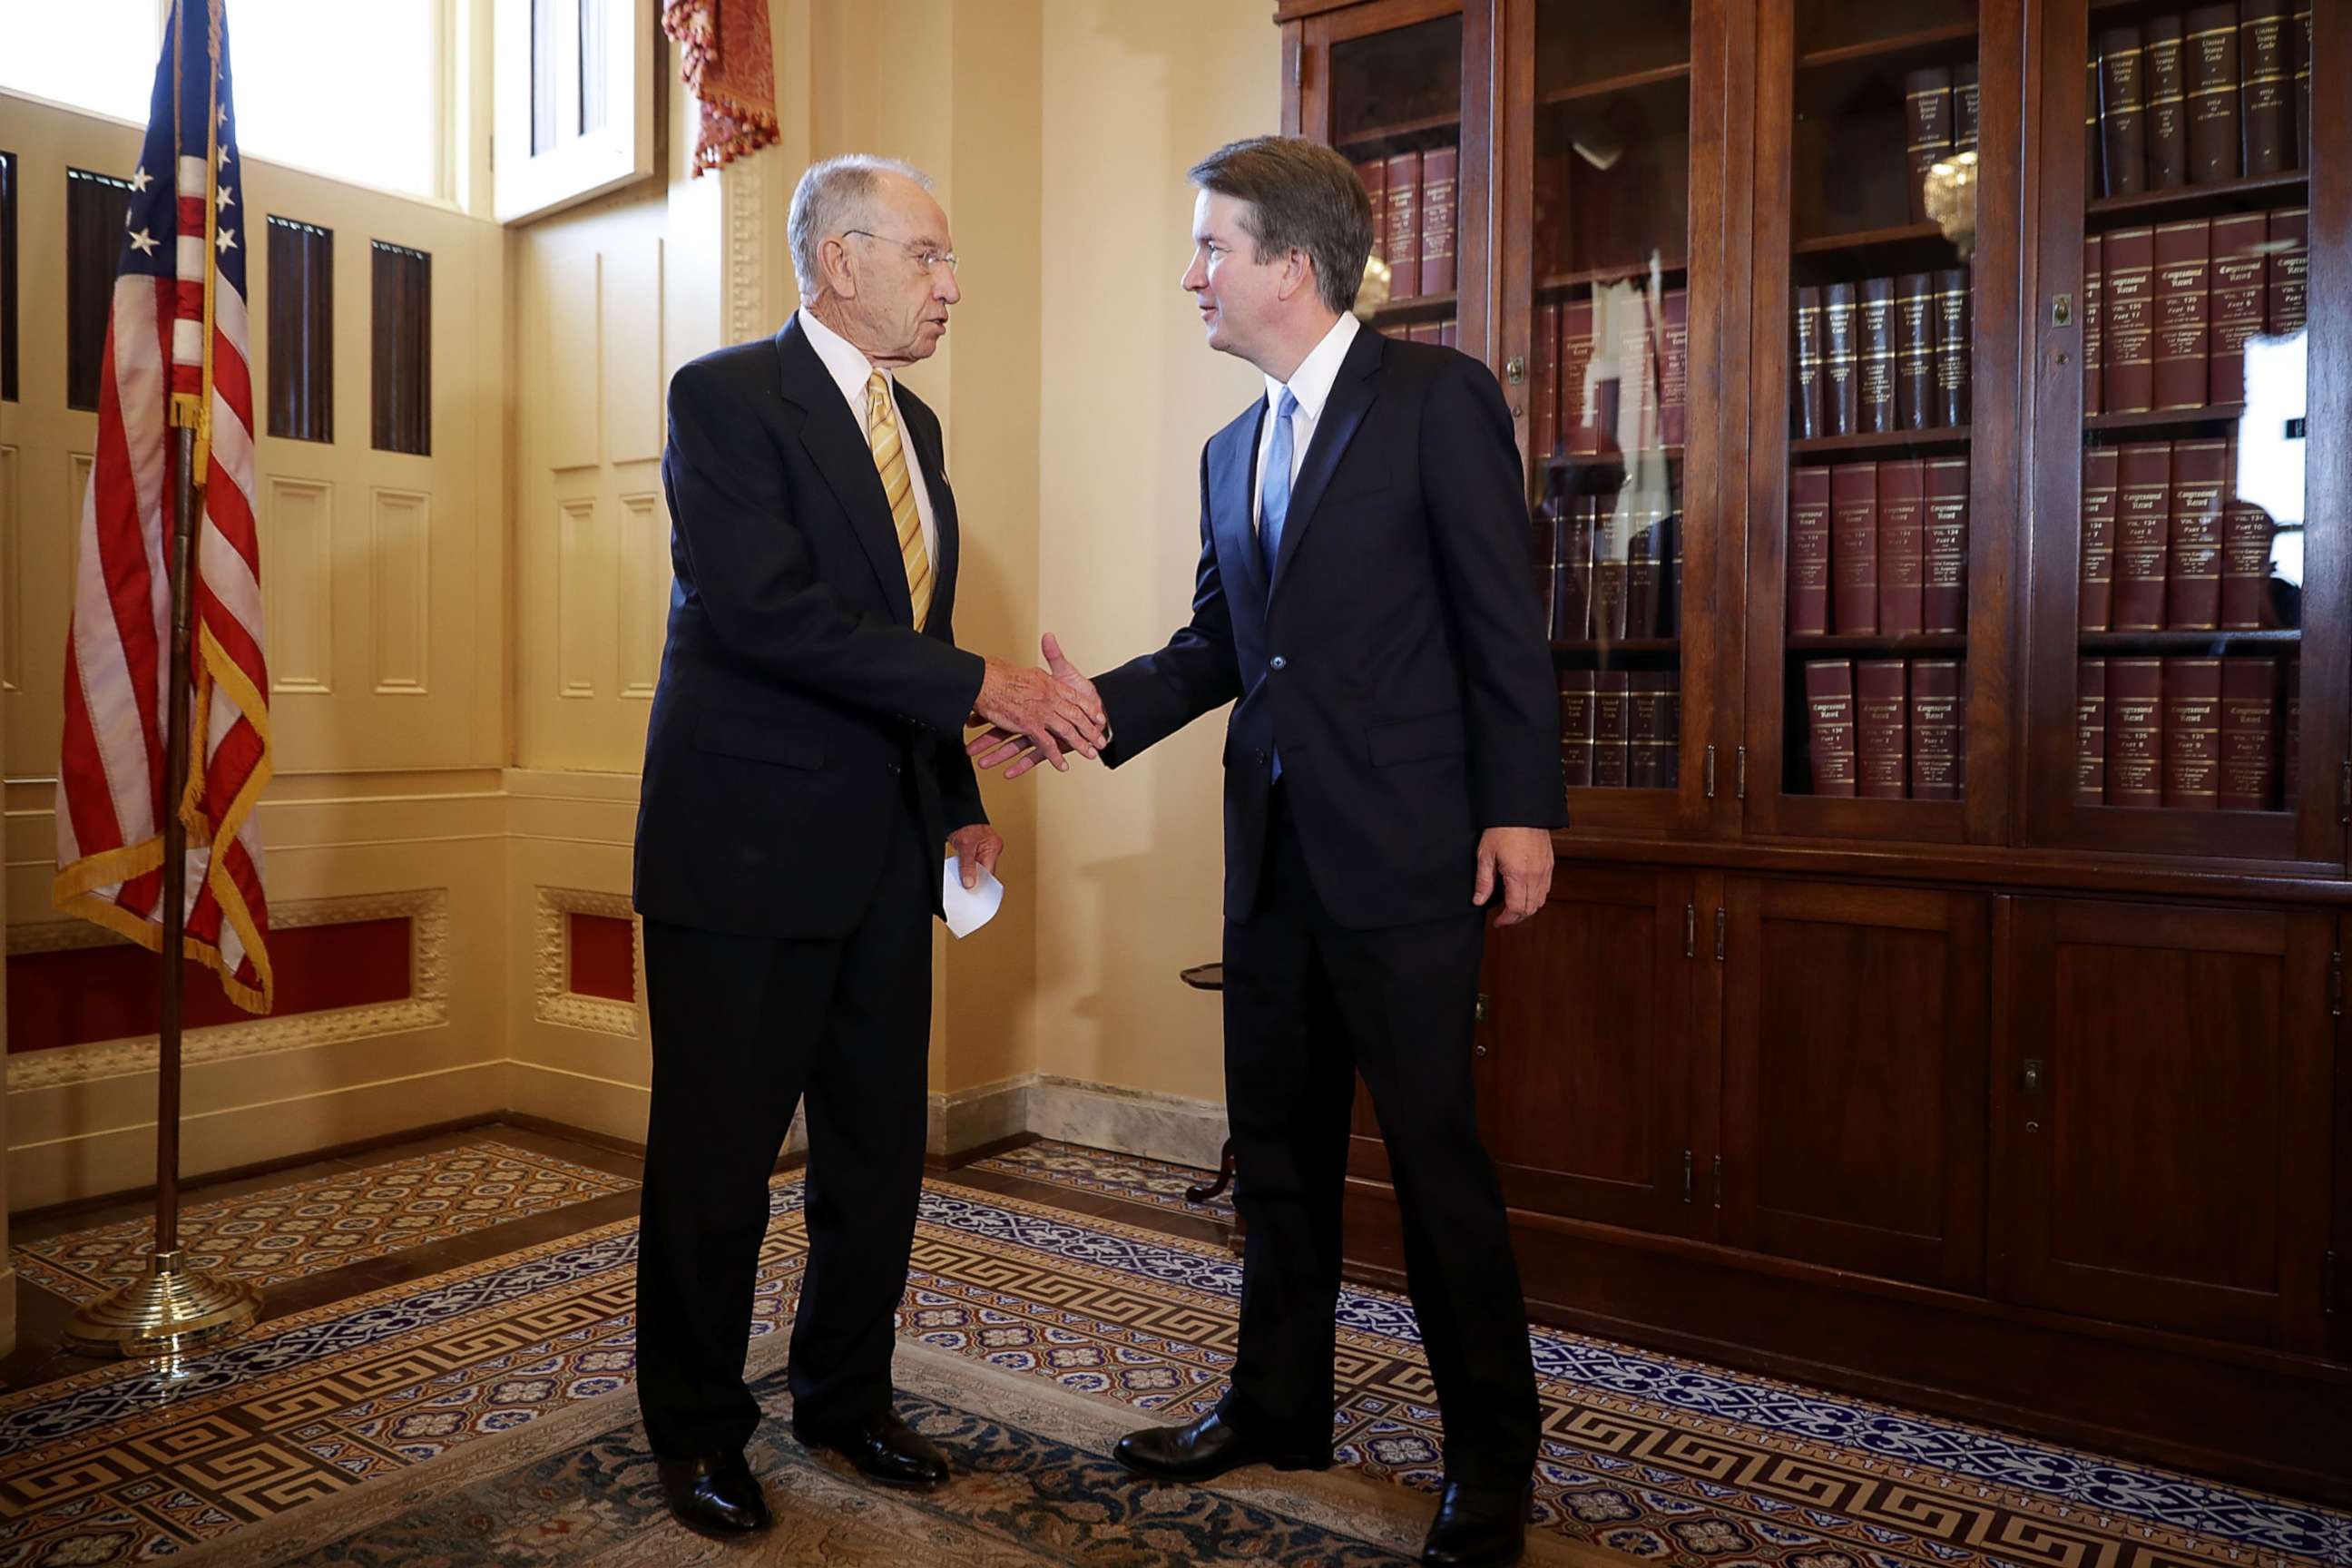 PHOTO: Senate Judiciary Committee Chairman Charles Grassley (R-IA) (L) shakes hands with Judge Brett Kavanaugh after a meeting at the Capitol, July 10, 2018. 